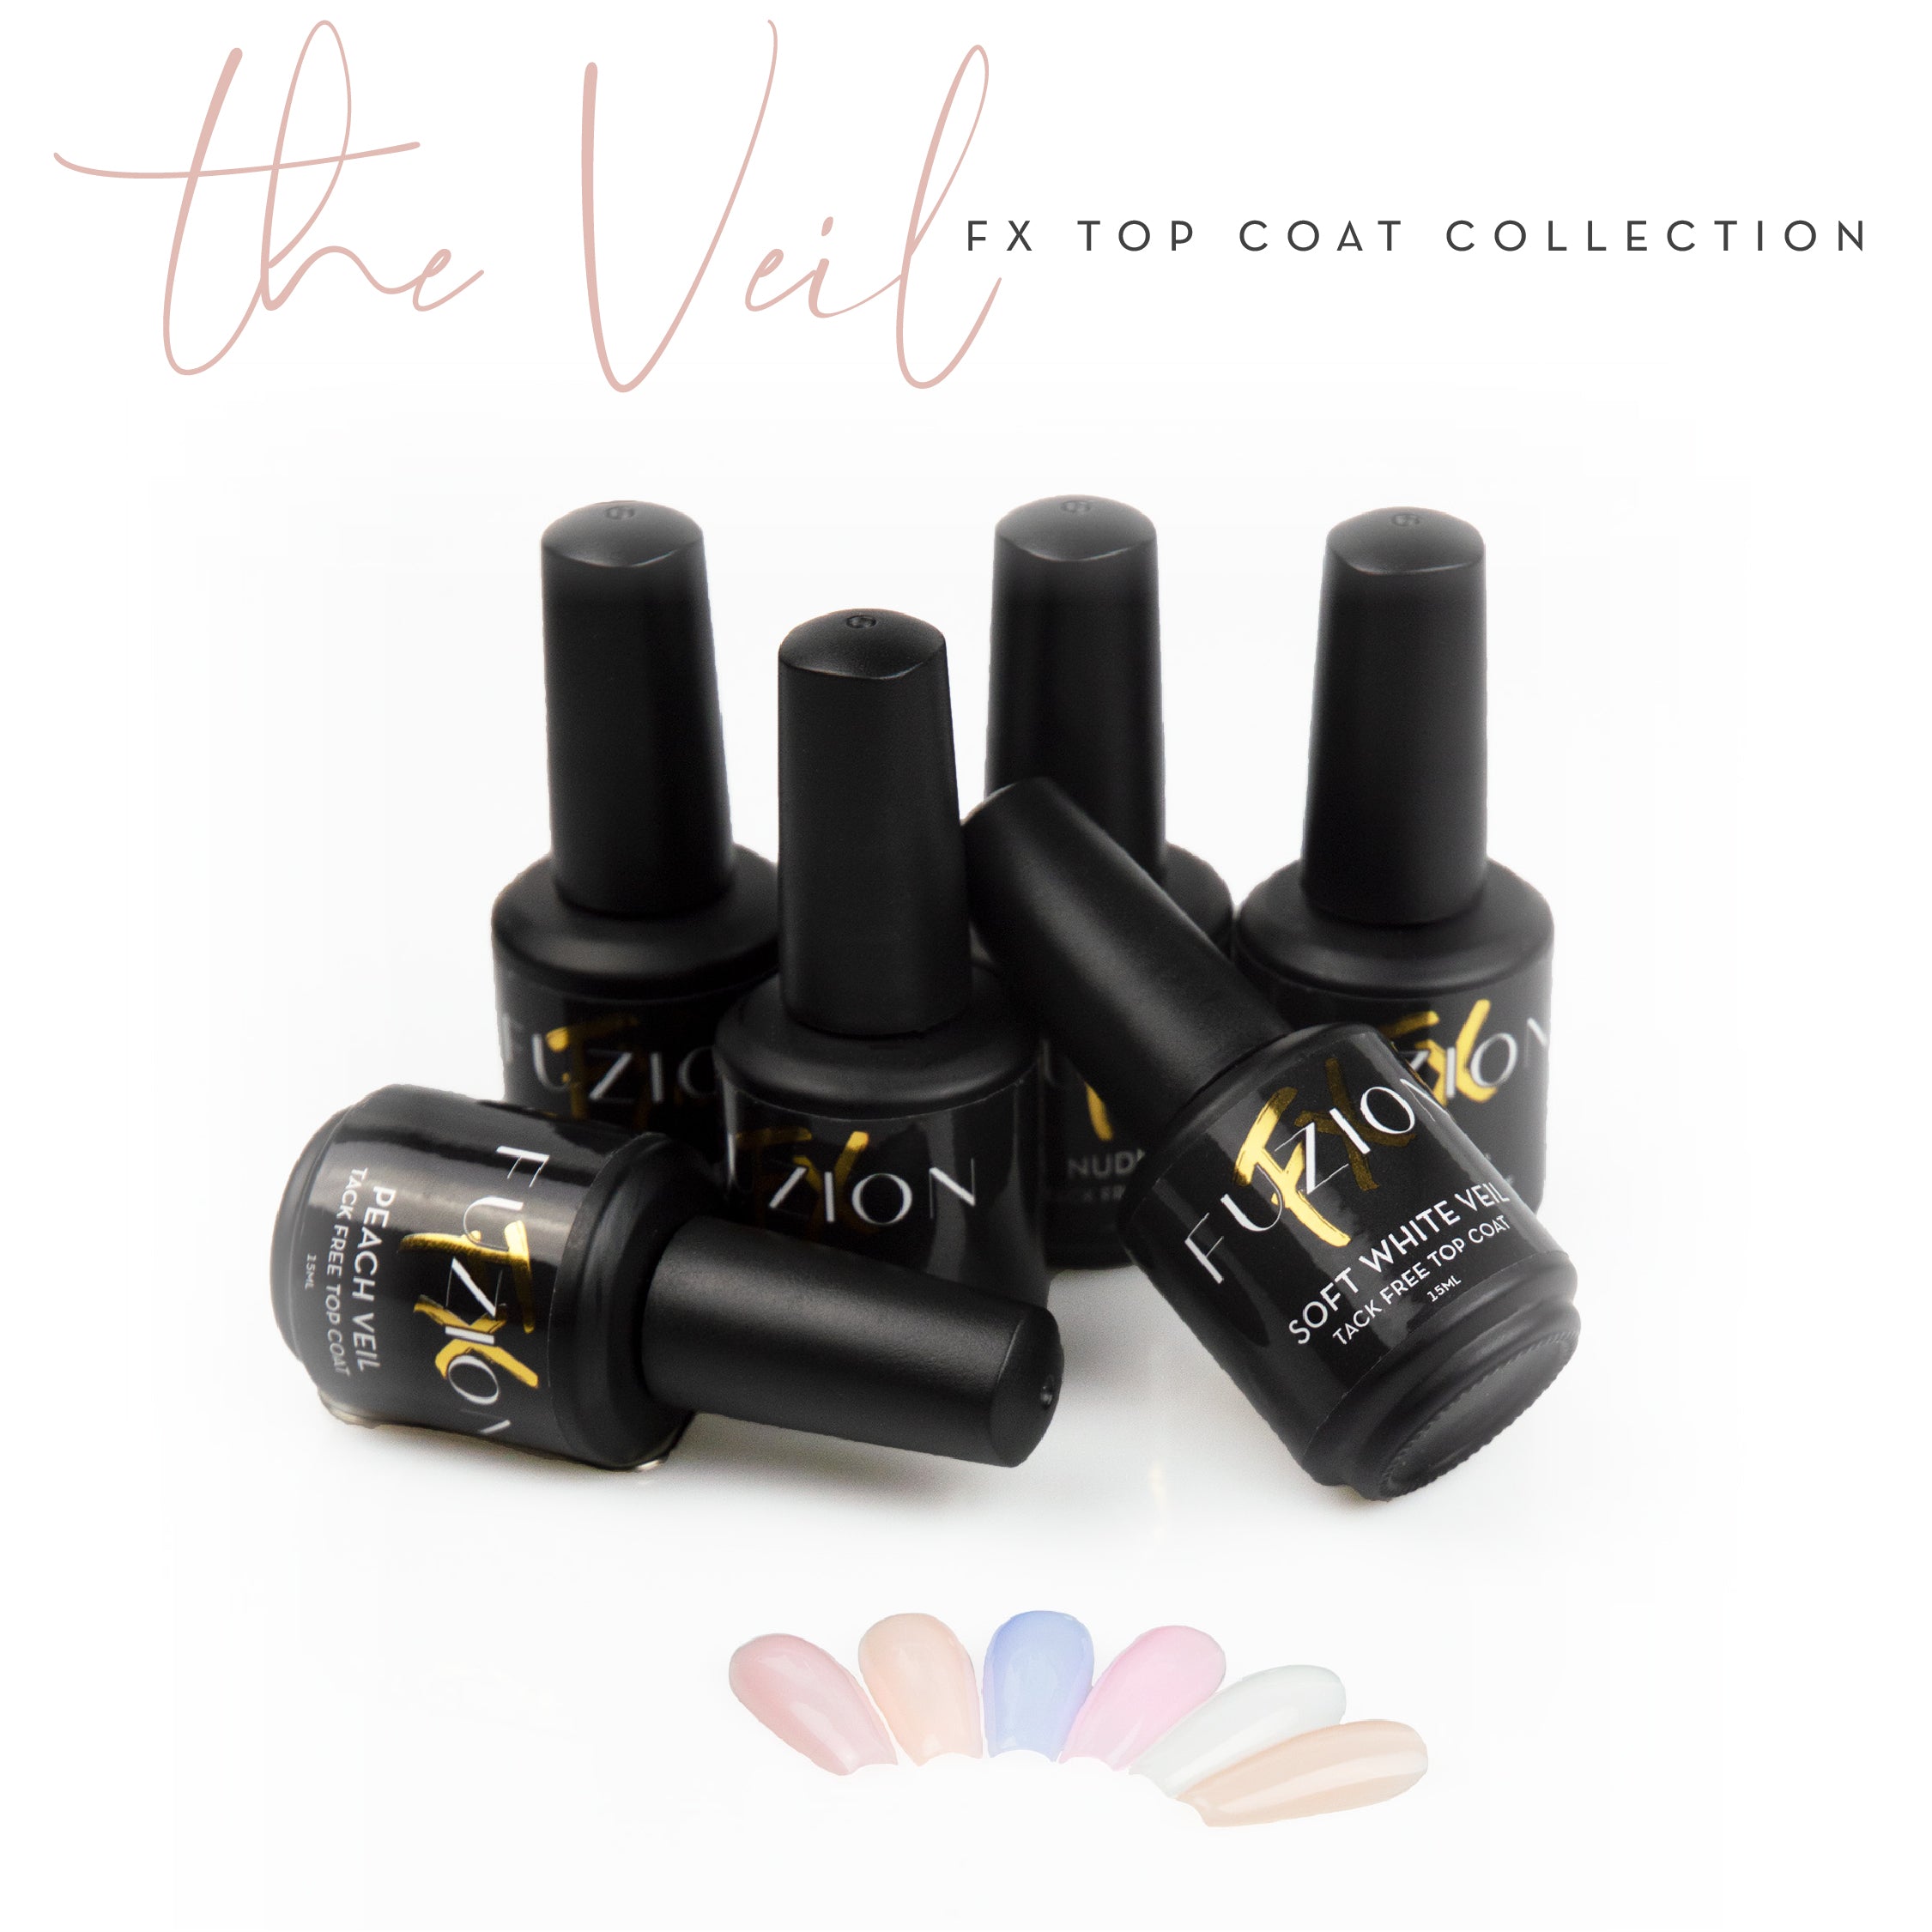 Fuzion Summer 2022 Collection - The Veil FX Topcoat